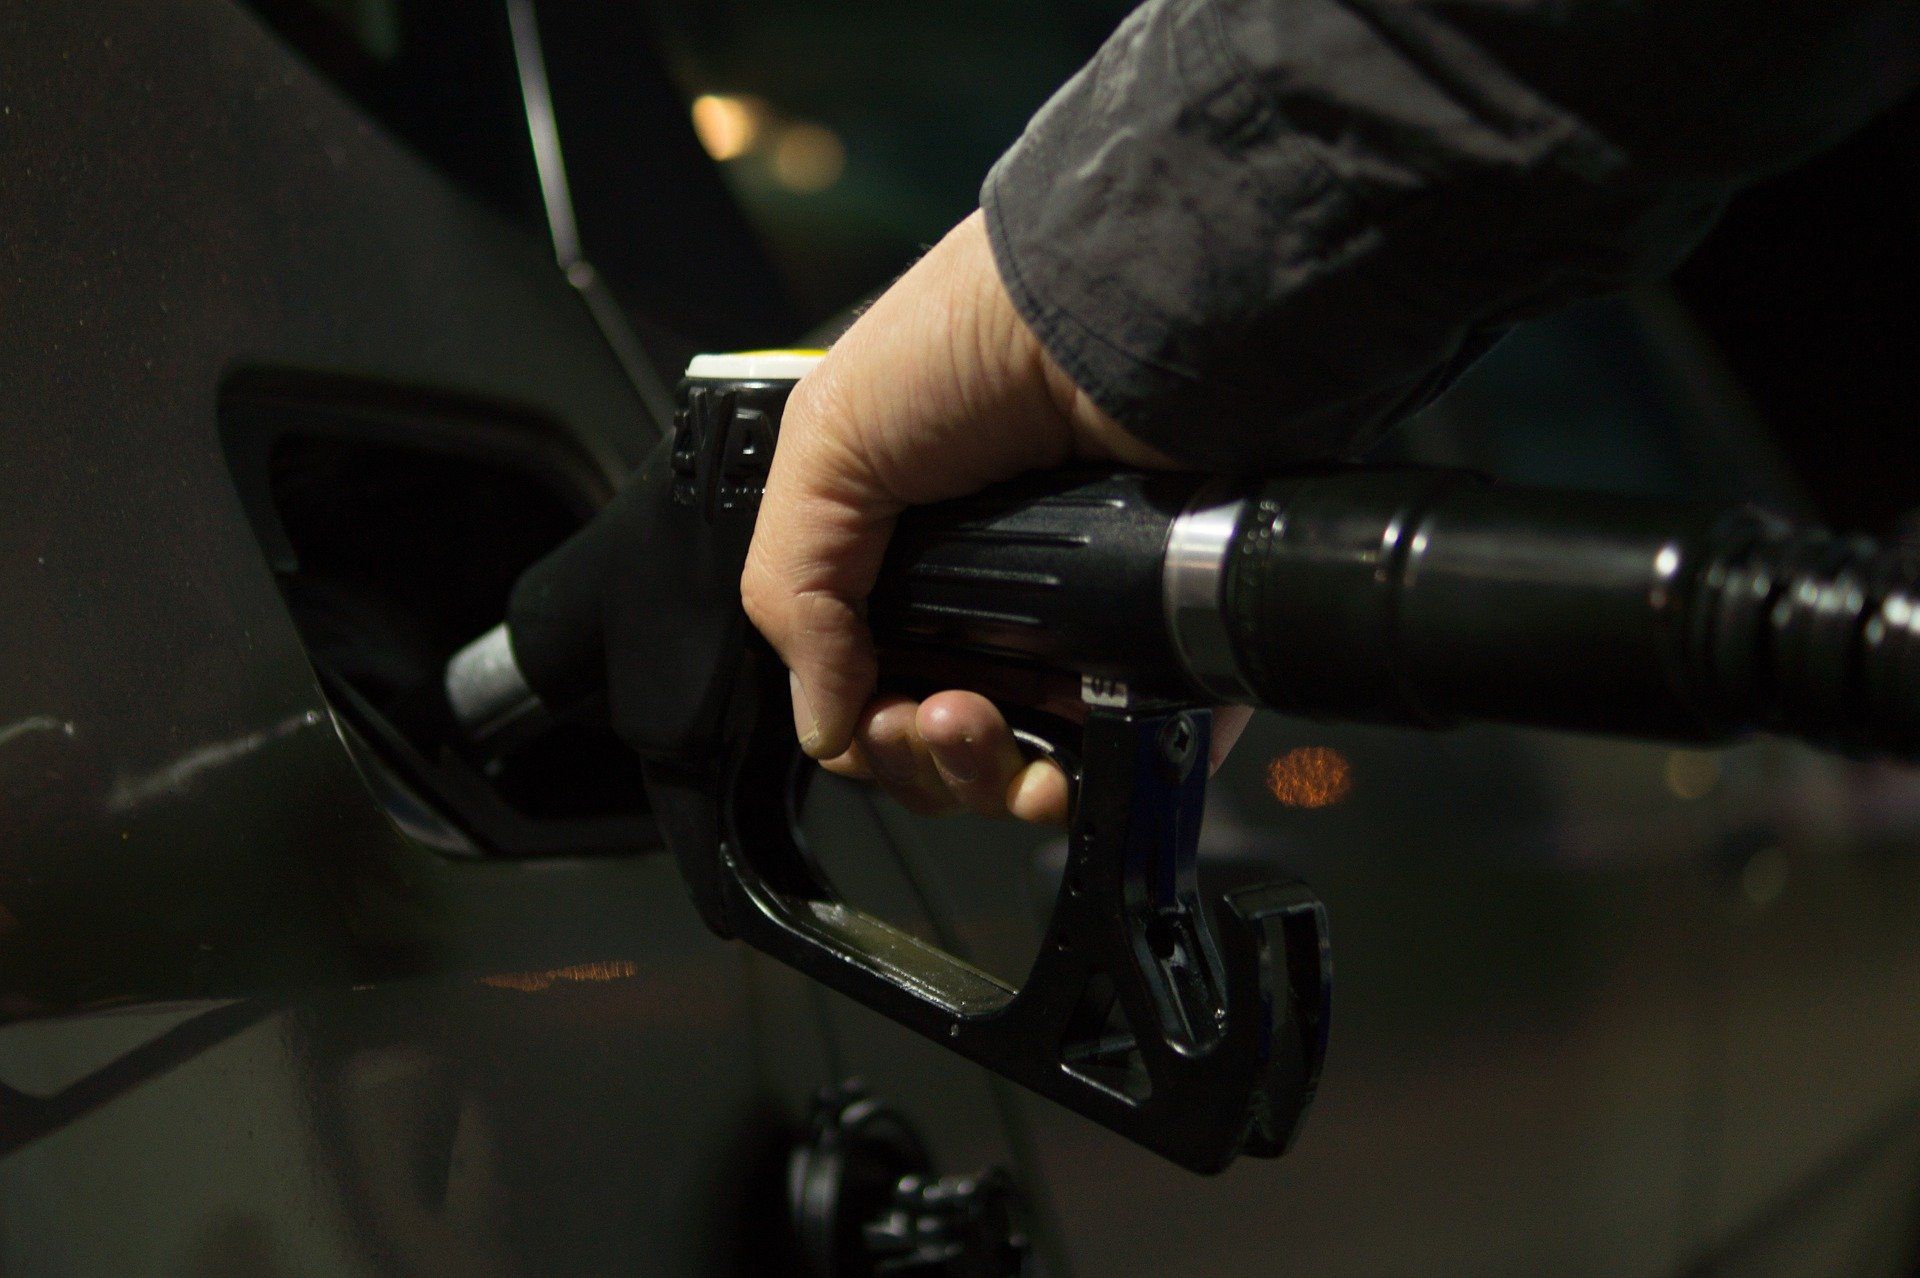 Fuel prices today: Petrol priced at Rs 95.41, diesel Rs 86.67 in Delhi on January 4, 2022